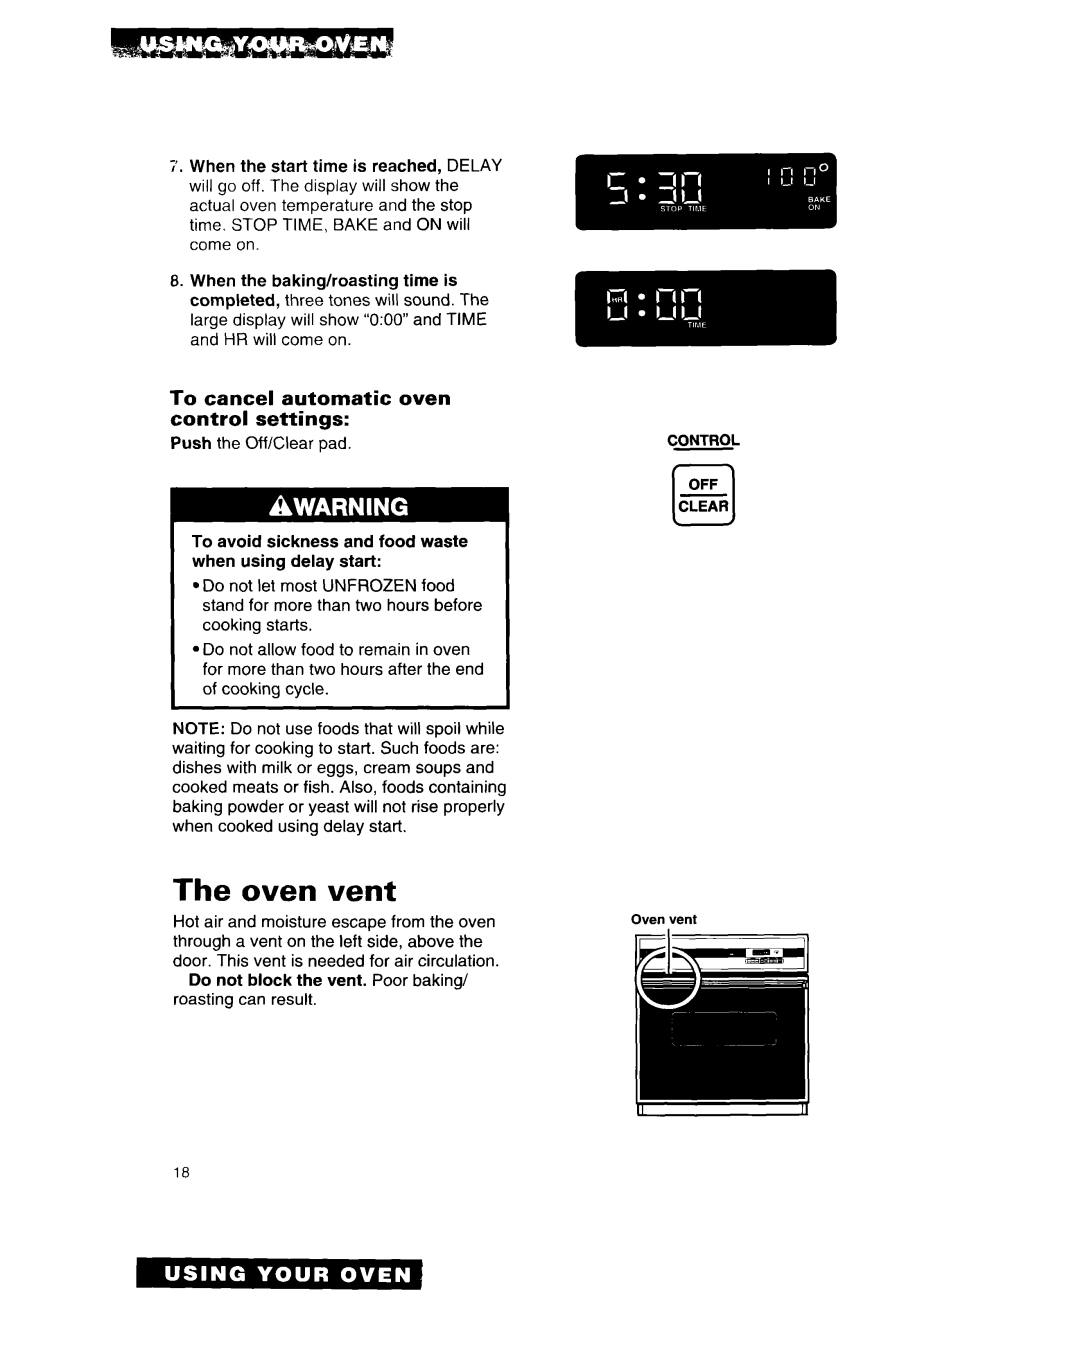 Whirlpool RB262PXA important safety instructions The oven vent, To cancel automatic oven control settings 